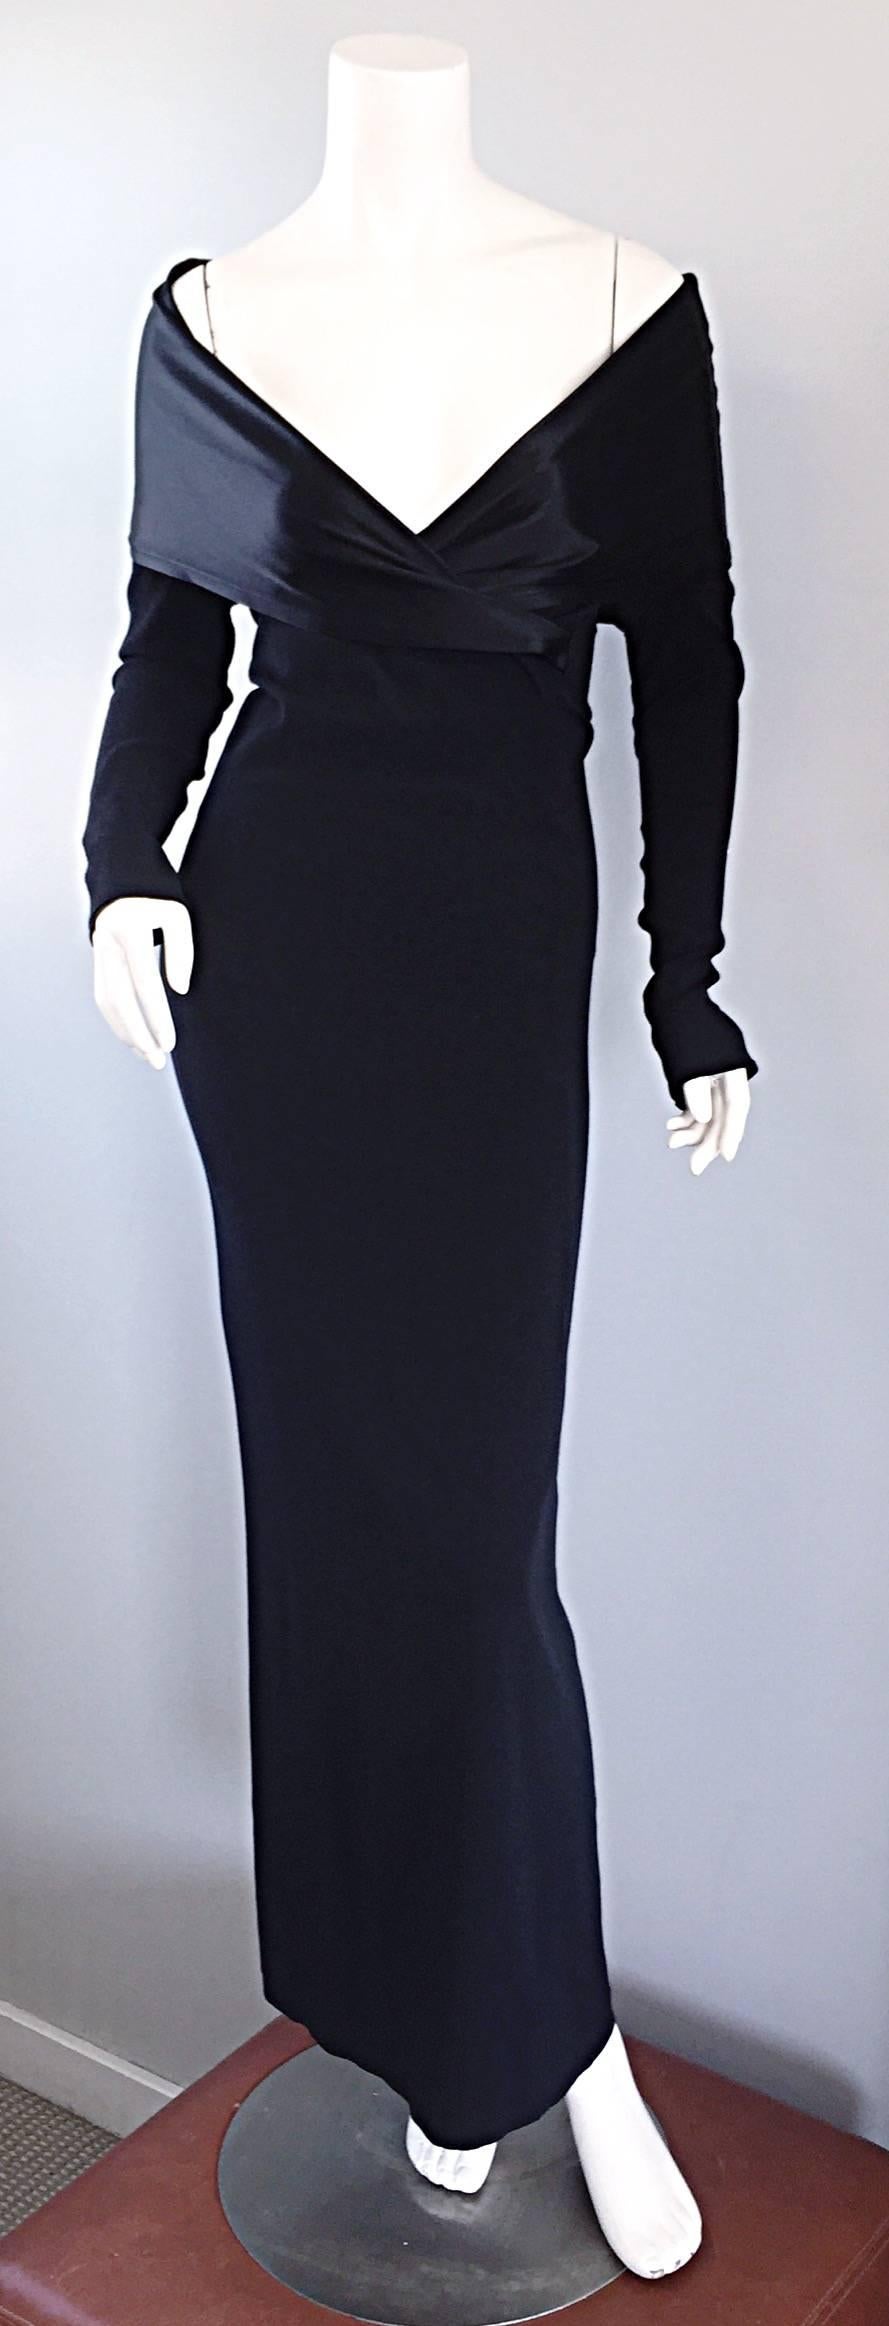 Elegant vintage JEAN PAUL GAULTIER early 90s black crepe jersey evening dress! Expertly tailored, with a heavy eye to detail. Black silk satin Avant Garde oversized off the shoulder shawl collar. Off-the-shoulder fit reveals just the right amount of